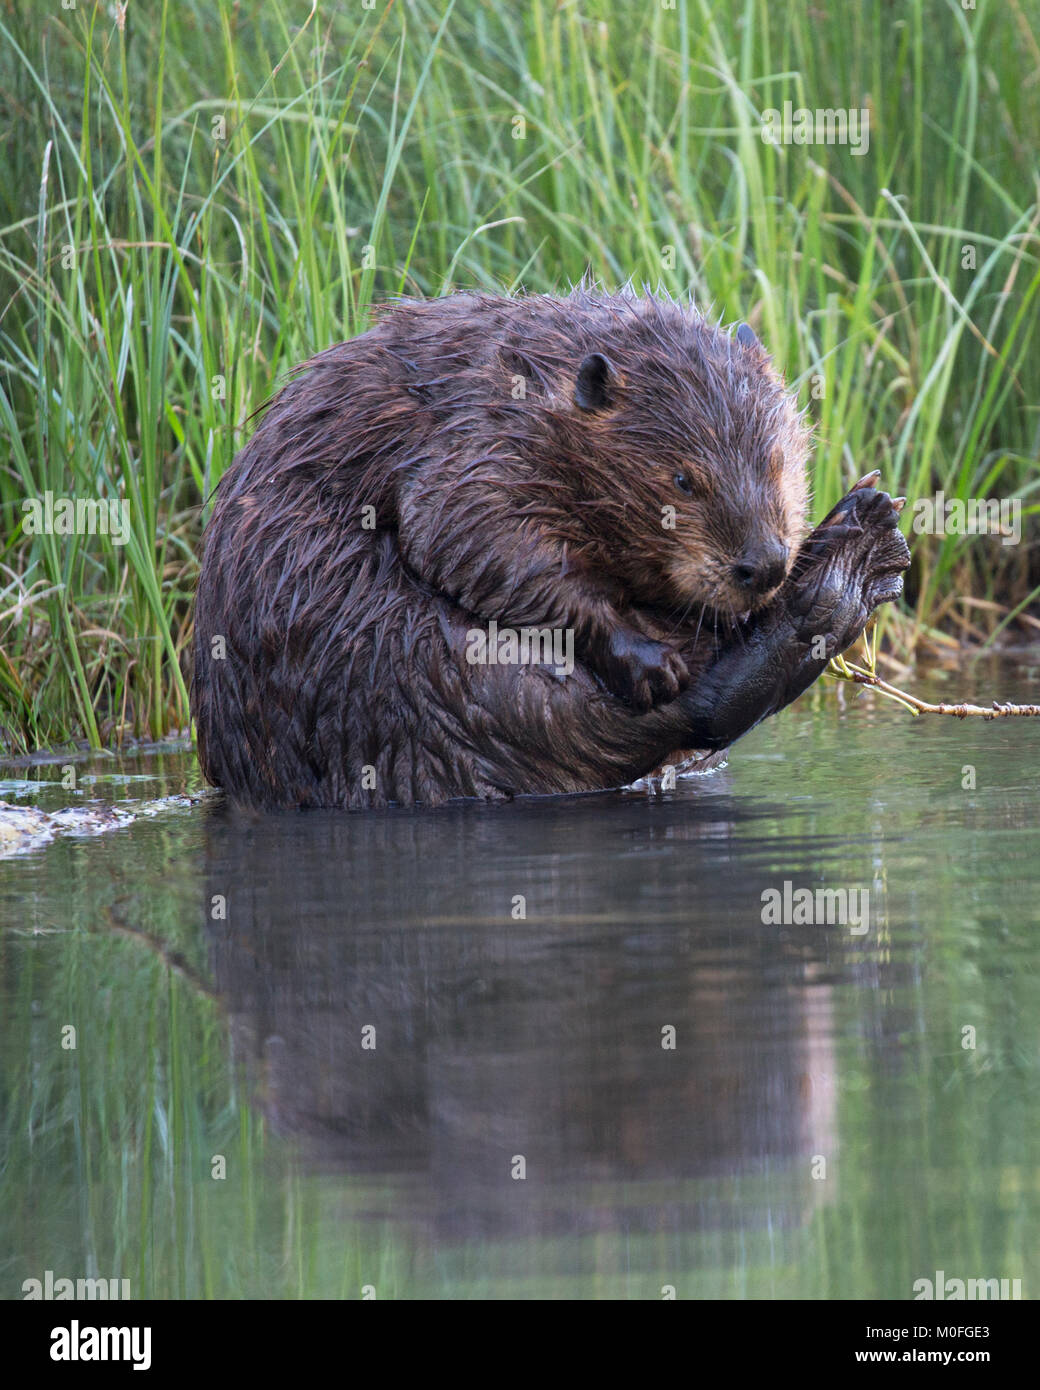 Female beaver (Castor canadensis) grooming her foot at water's edge in a pond, Canada Stock Photo